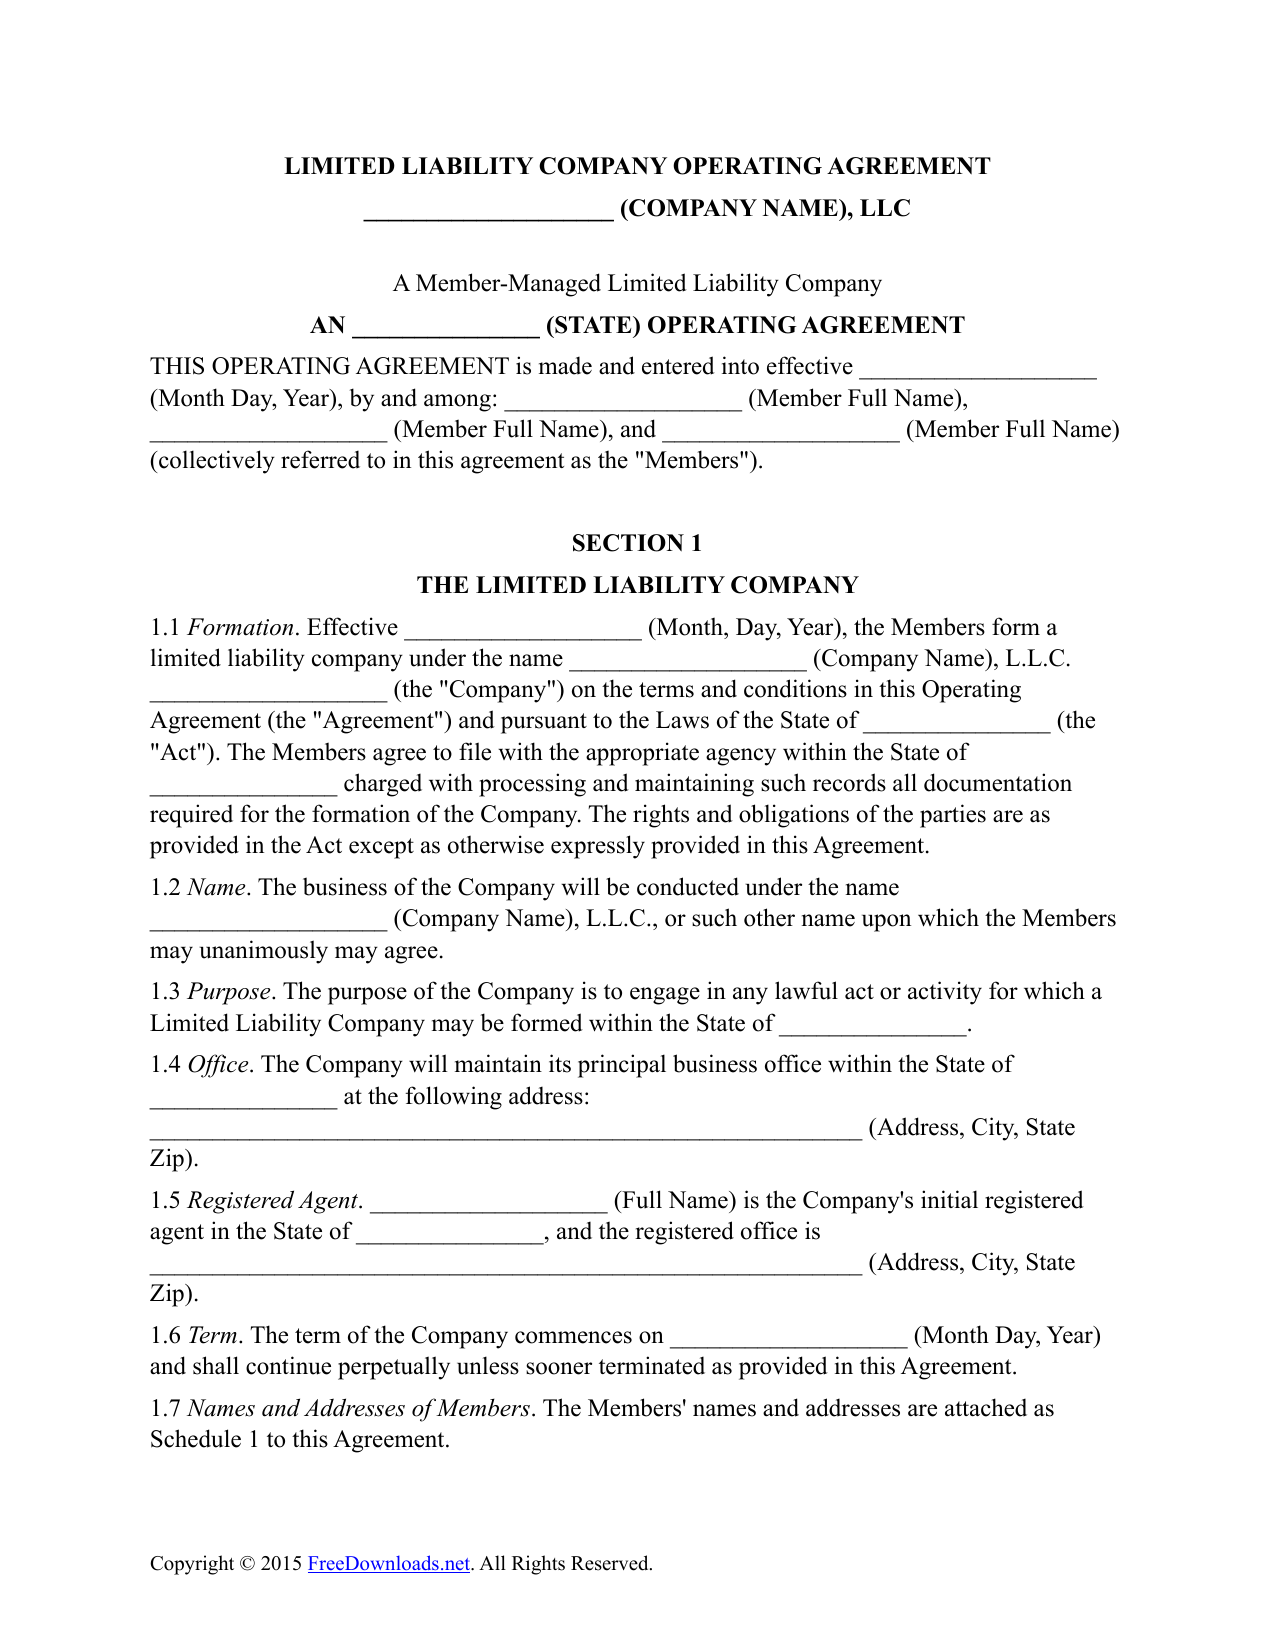 connecticut-llc-operating-agreement-template-hq-template-documents